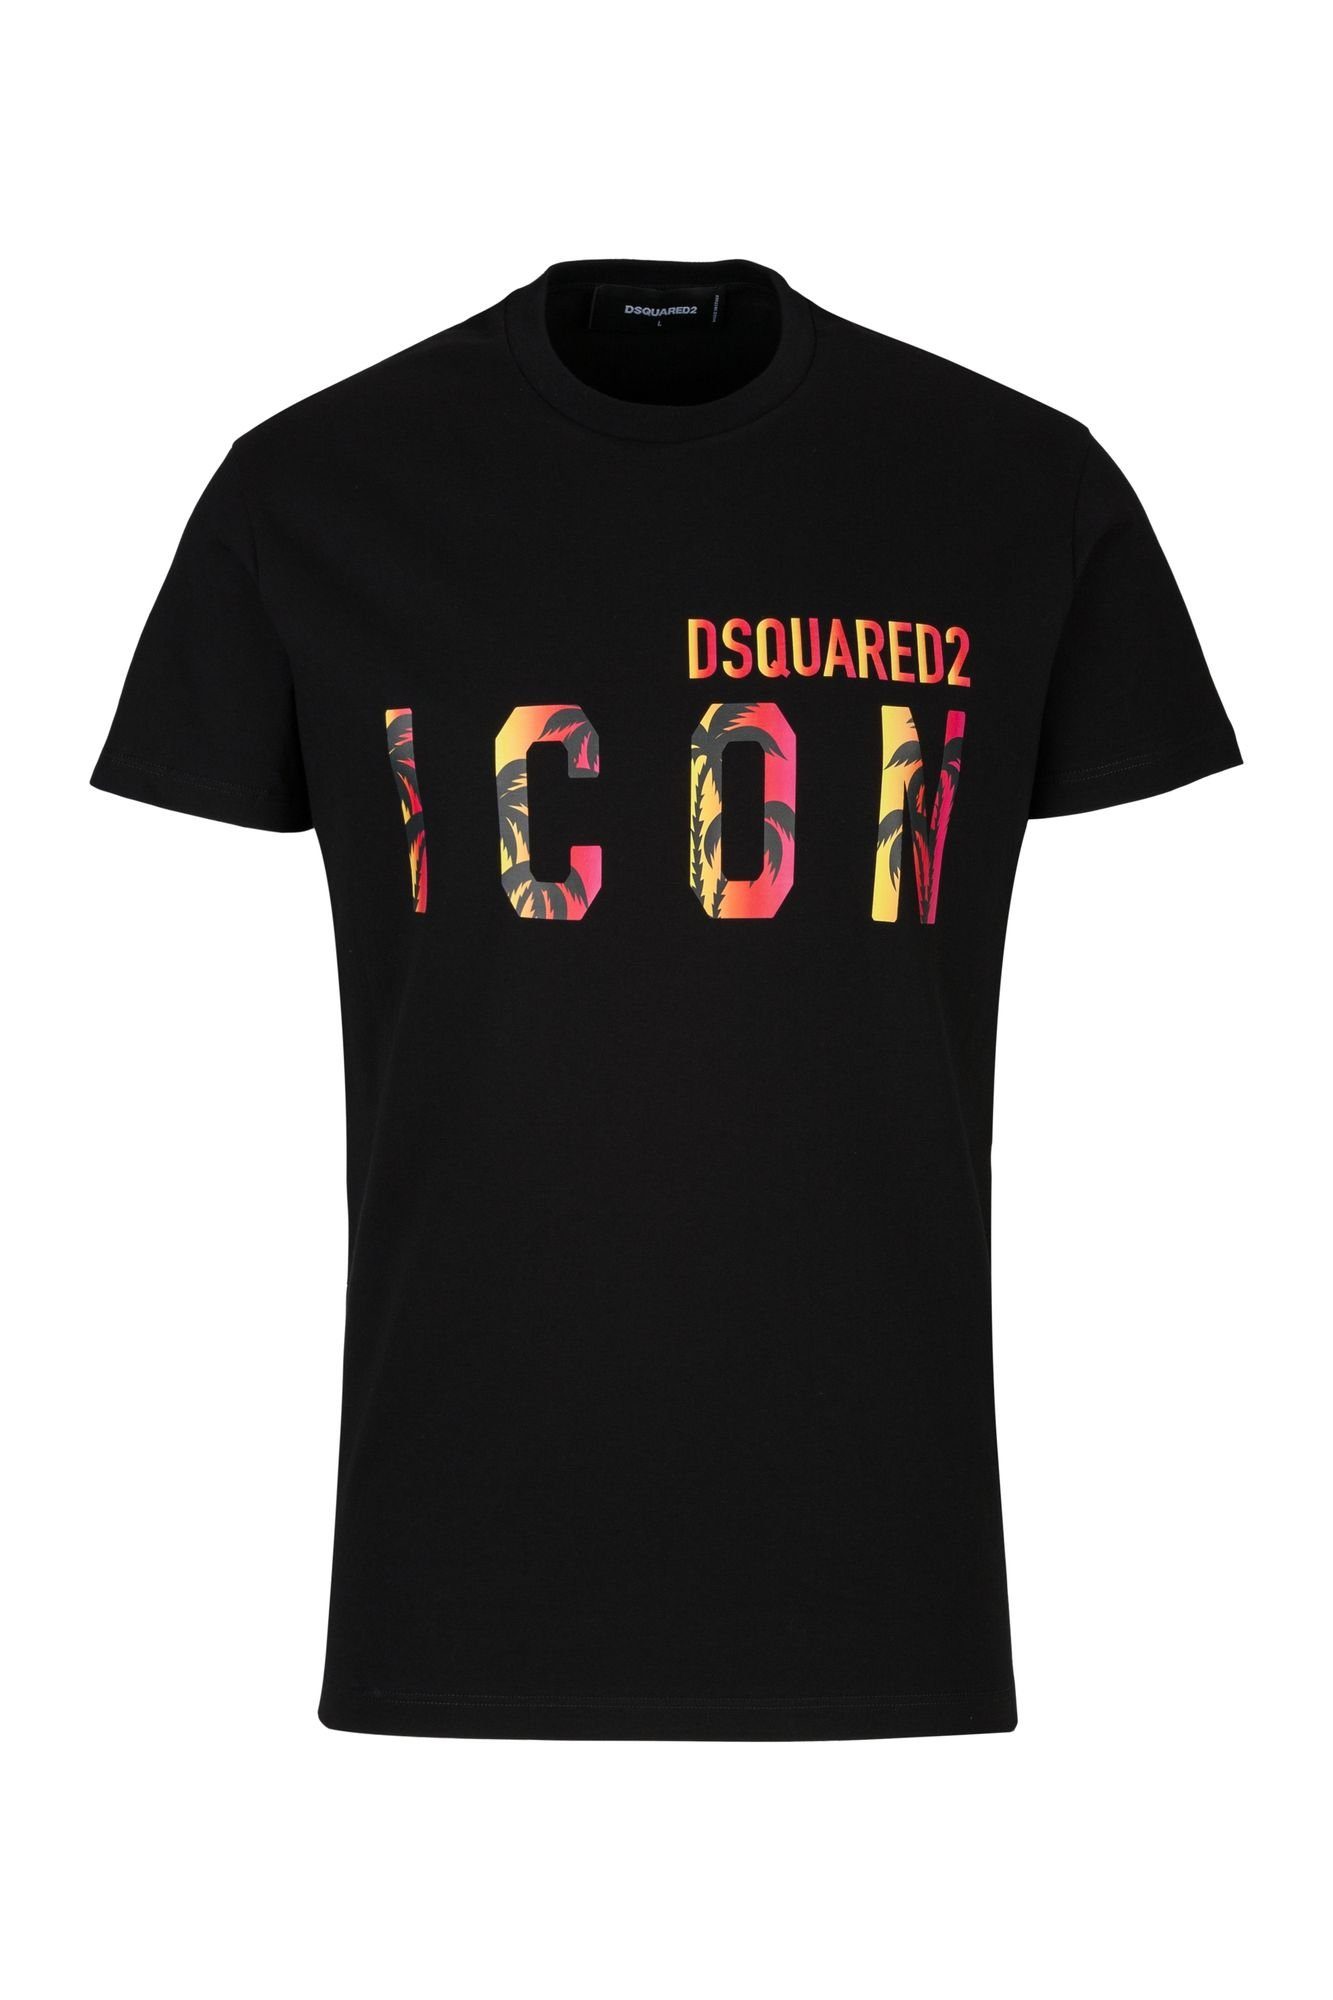 T-Shirt Sunset ICON Cool Dsquared2